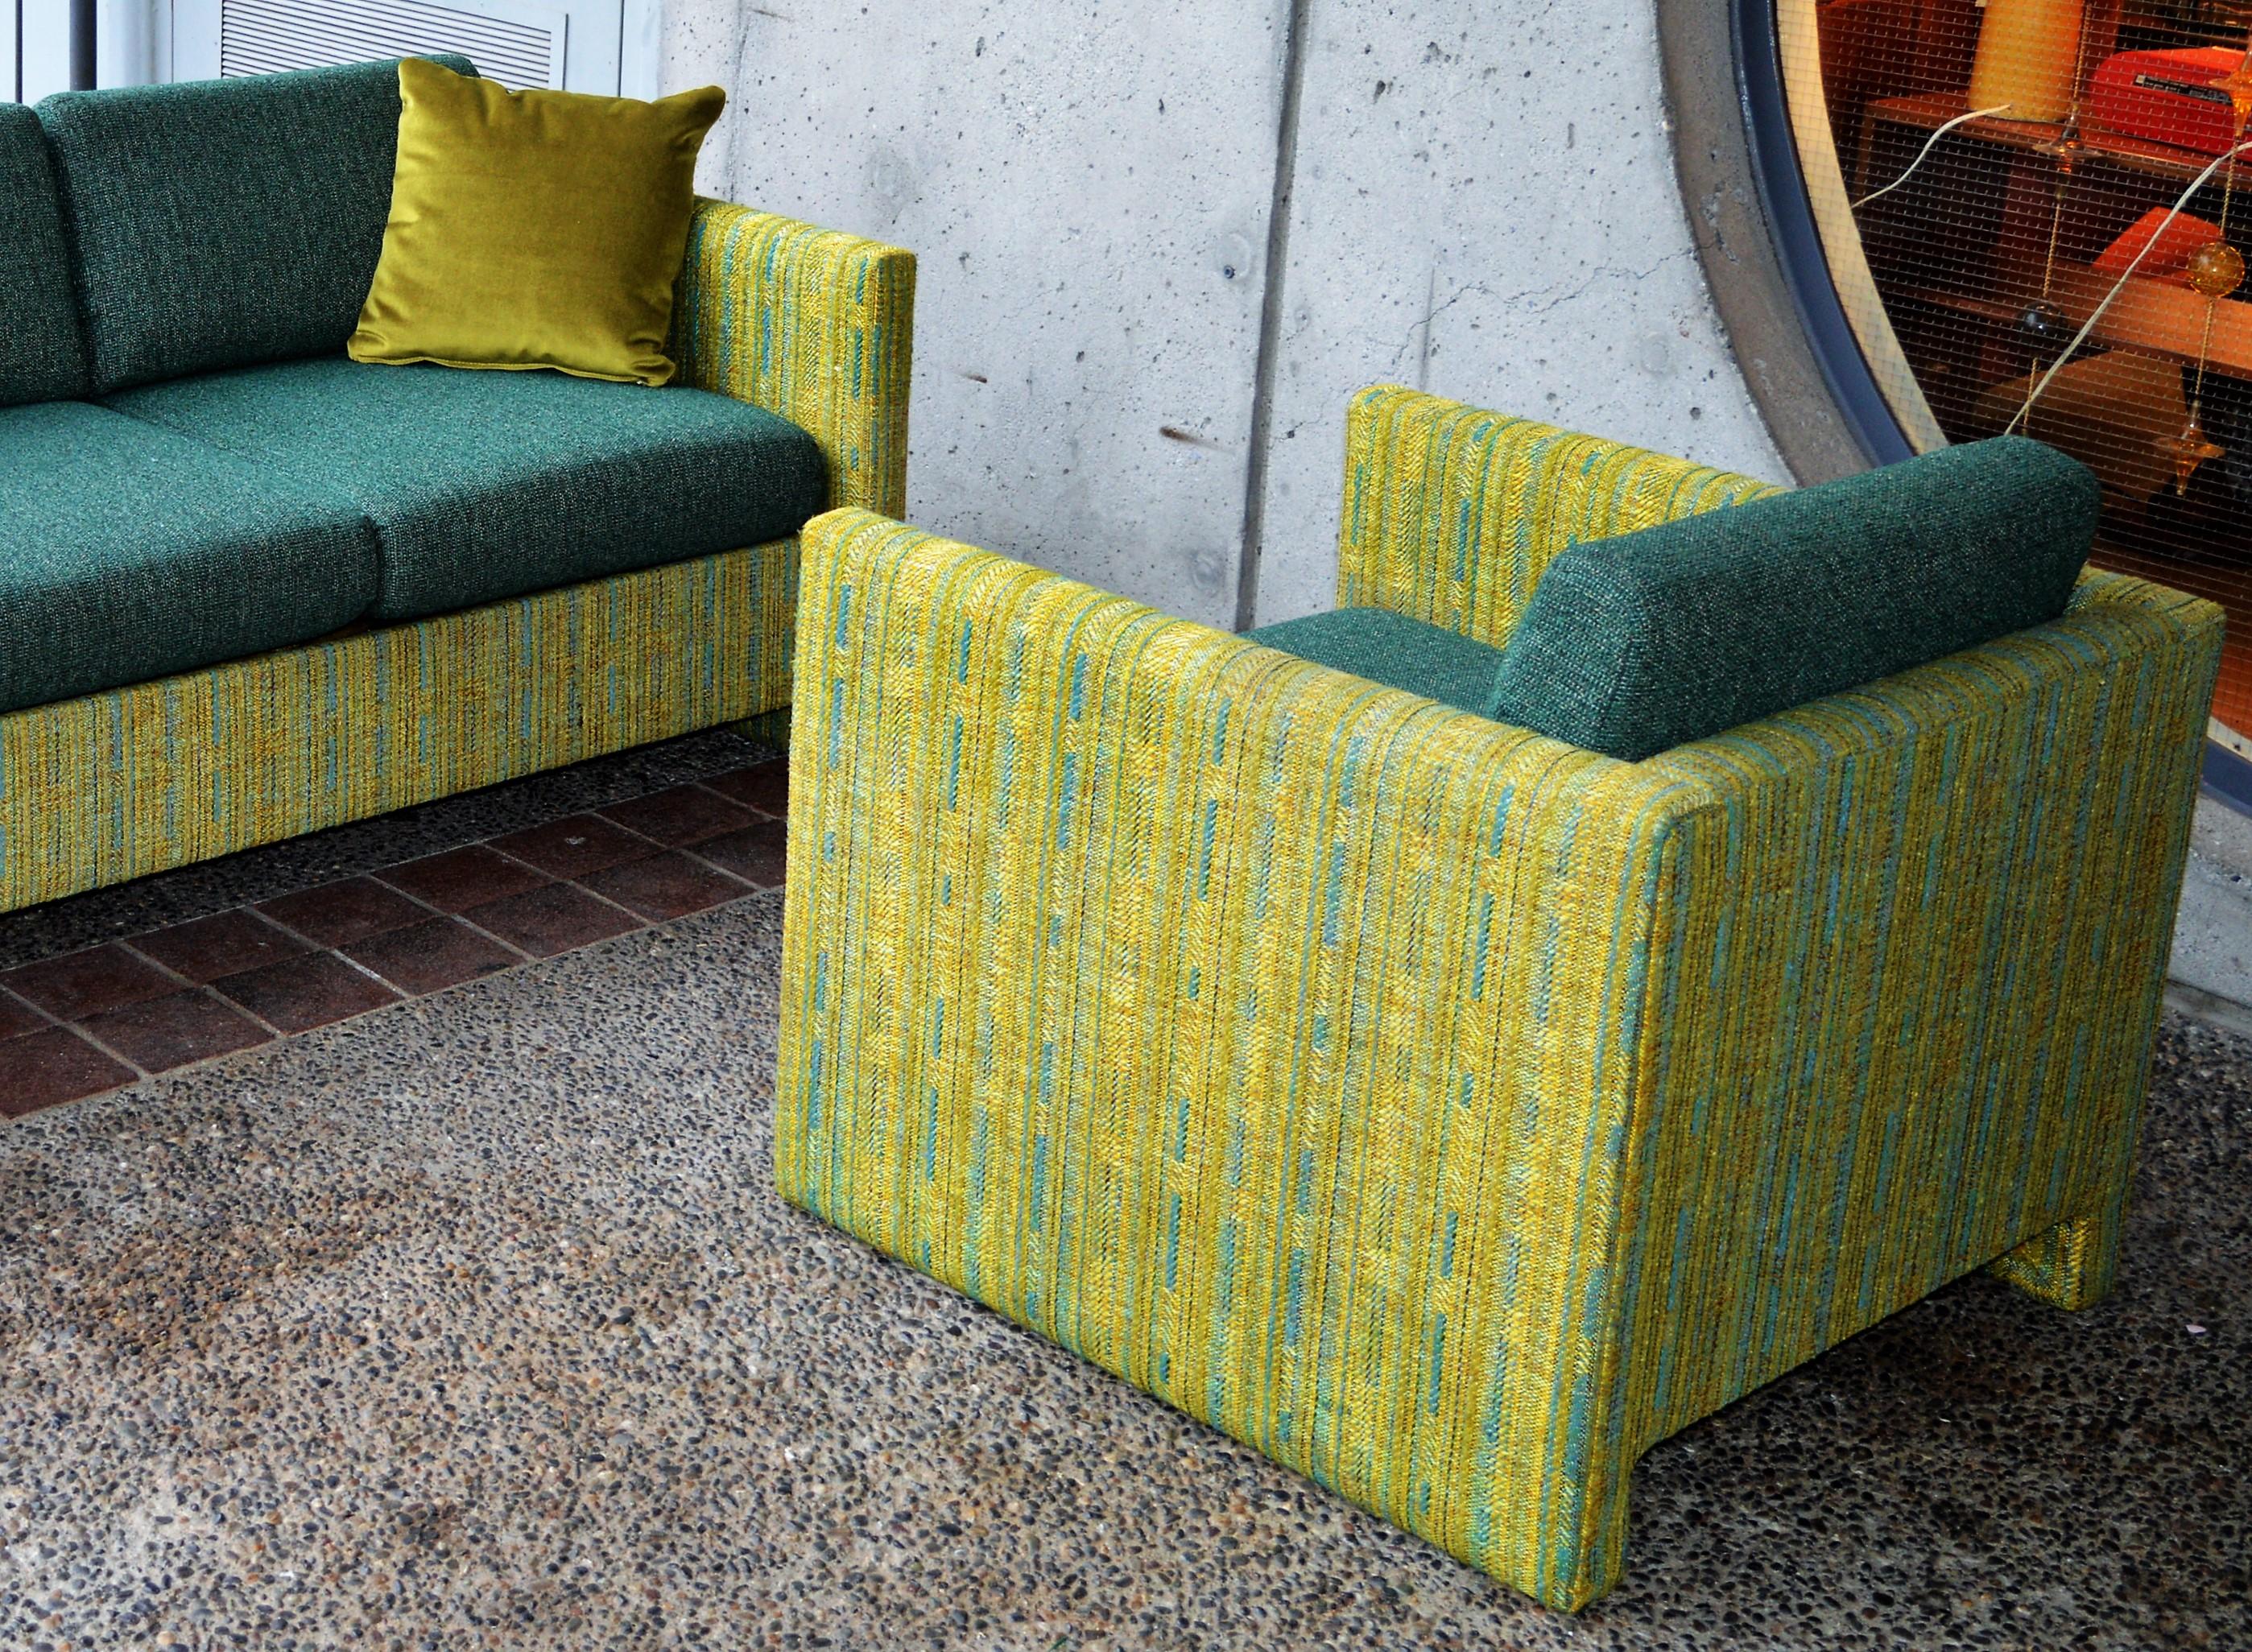 Midcentury Sofa and Club Chair in Teal Wool Cushions with Contrasting Print 2